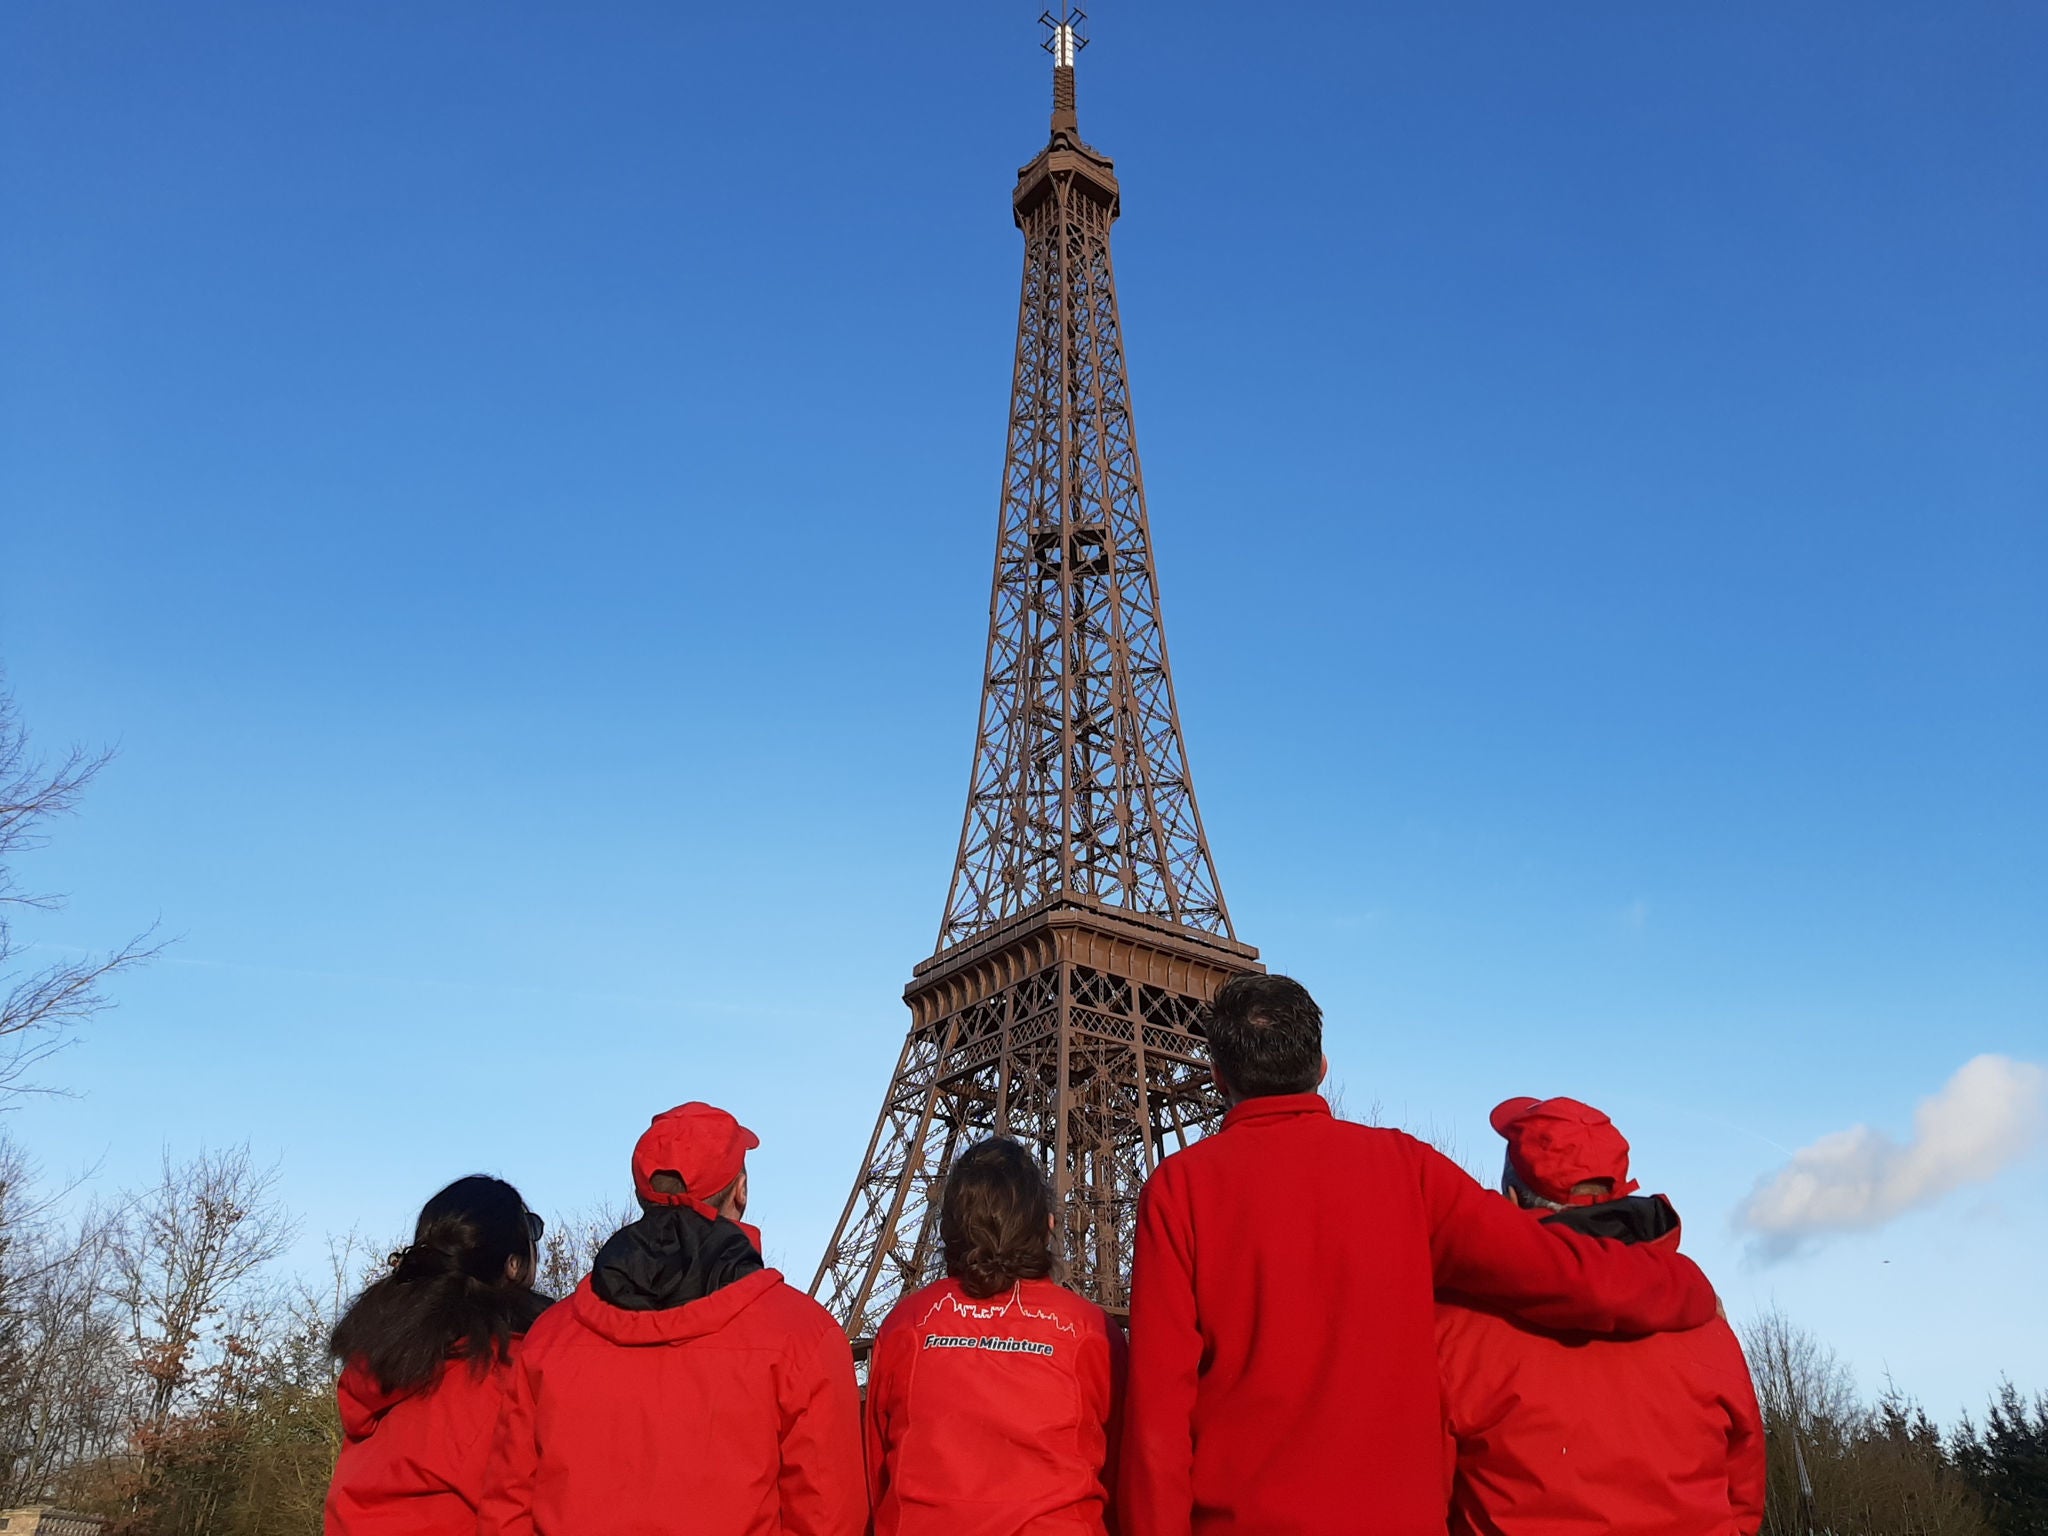 France Miniature team in front of miniature Eiffel tower